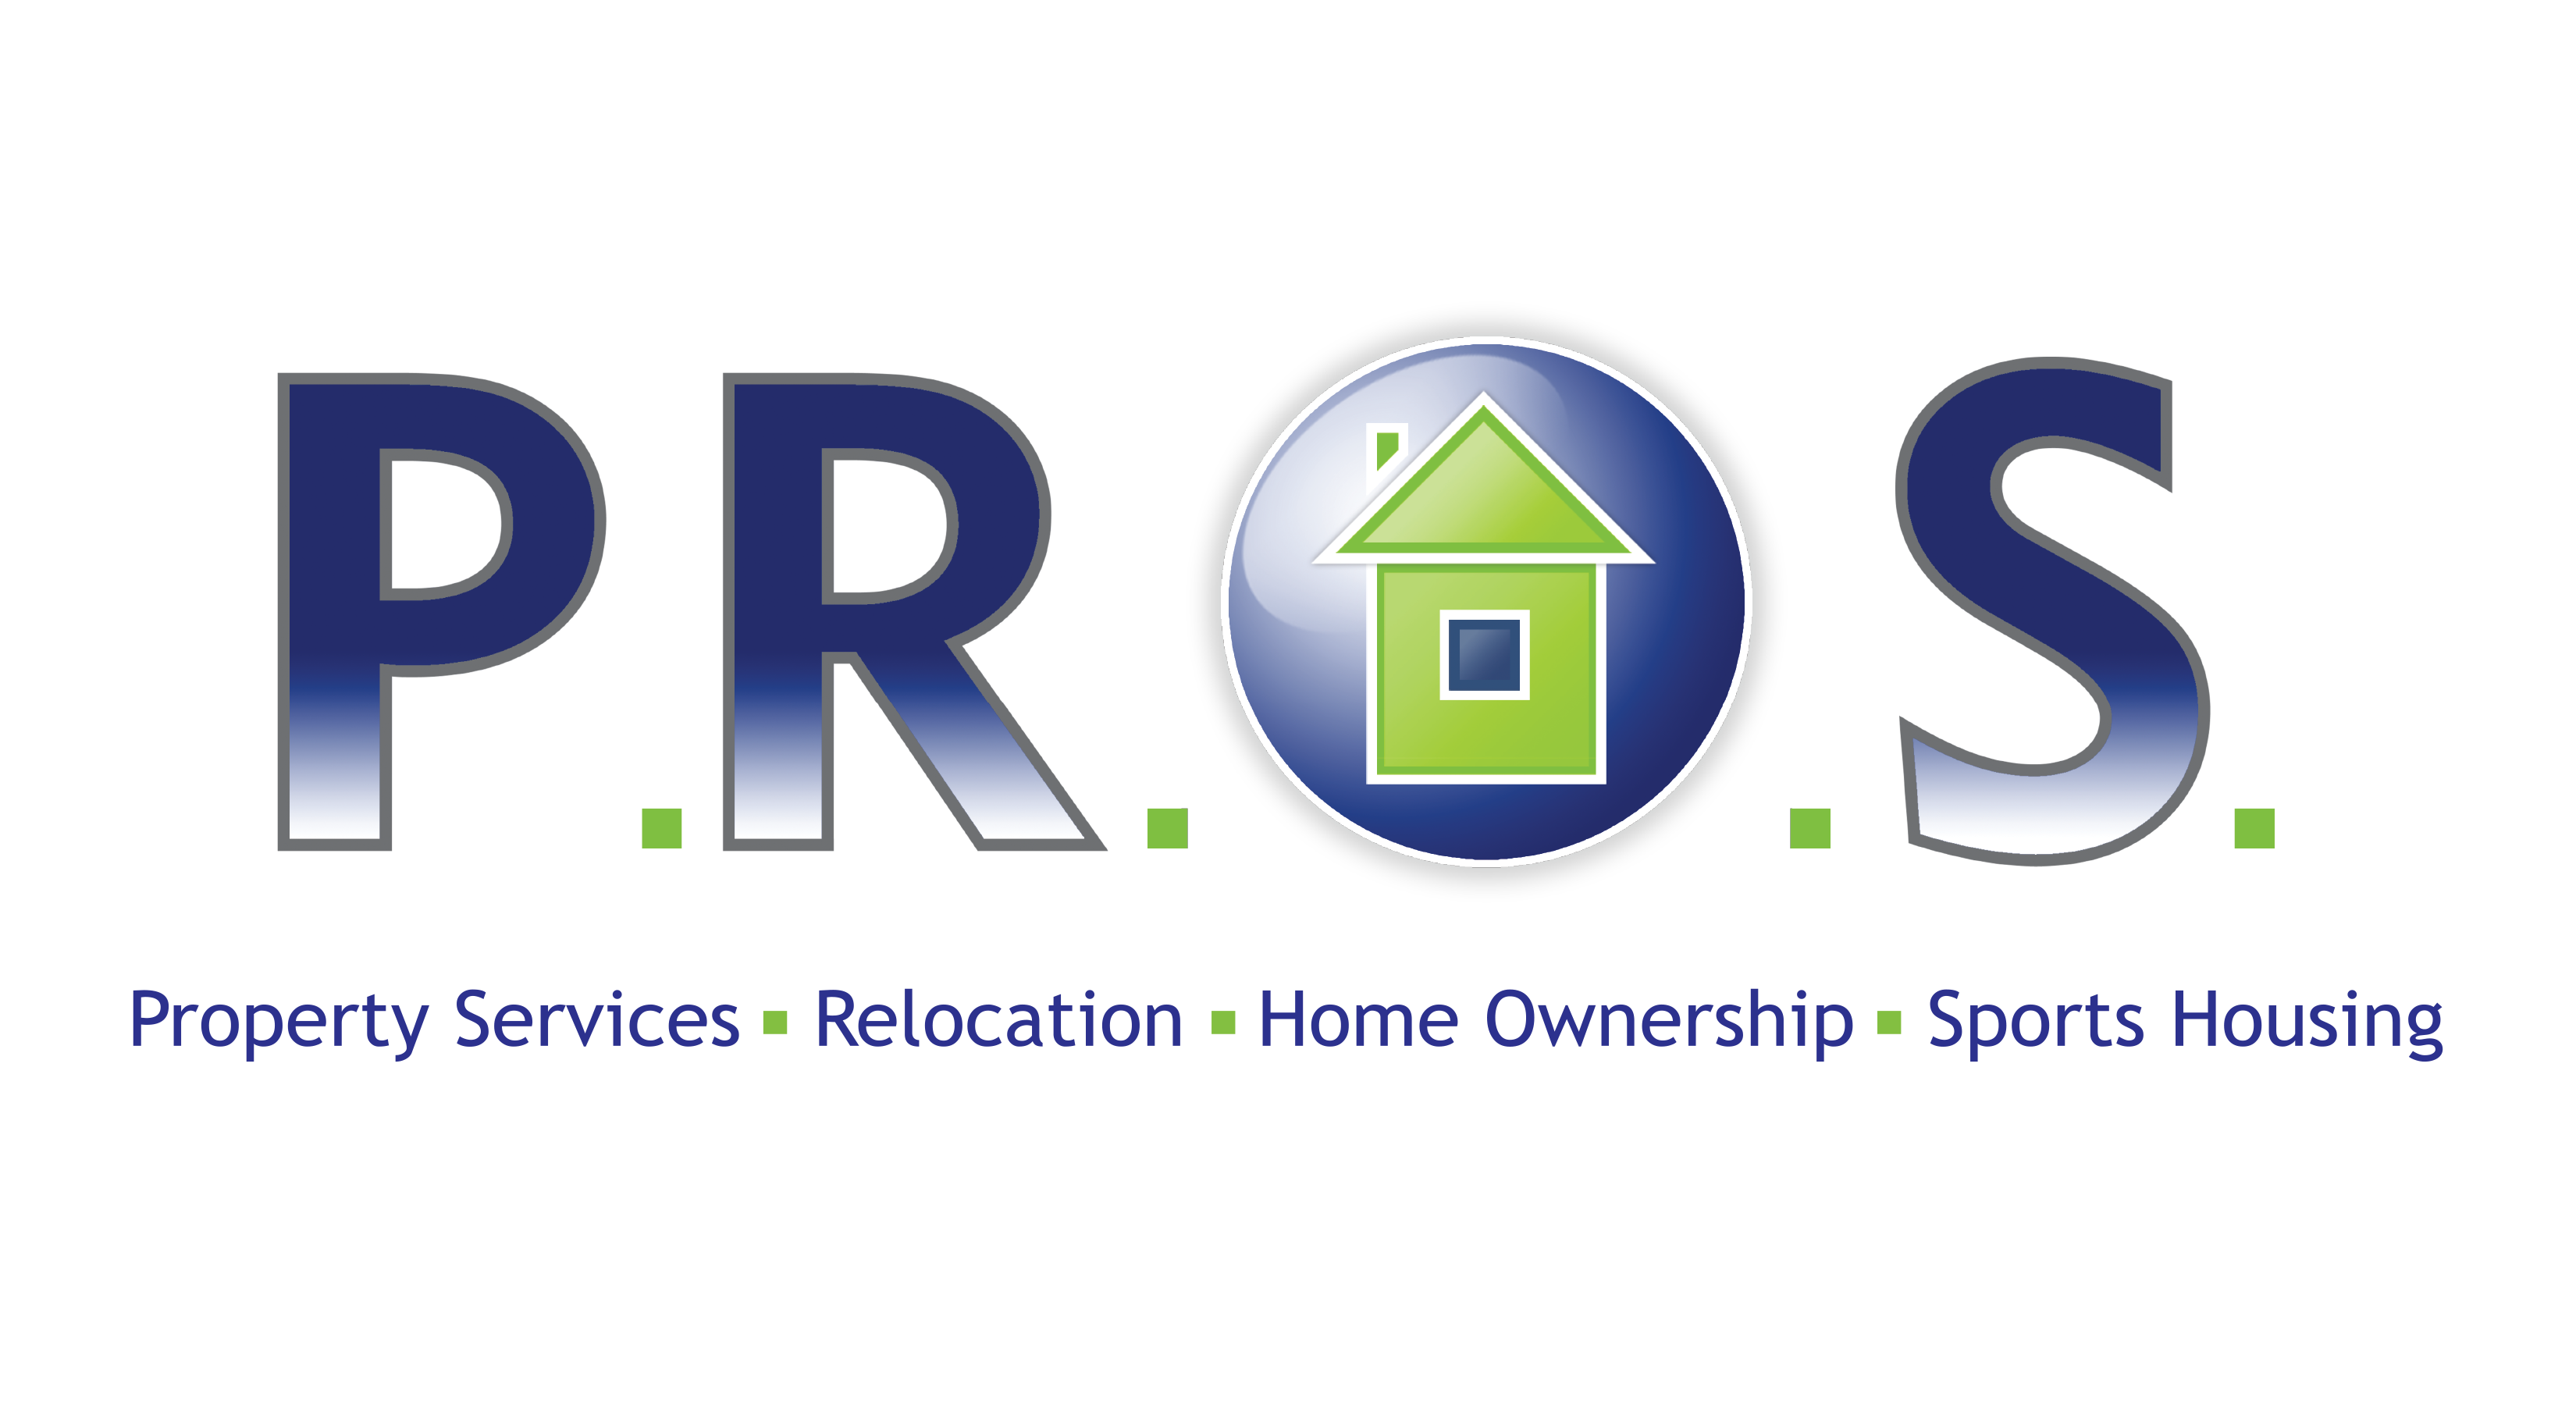 P.R.O.S. Corporate Housing